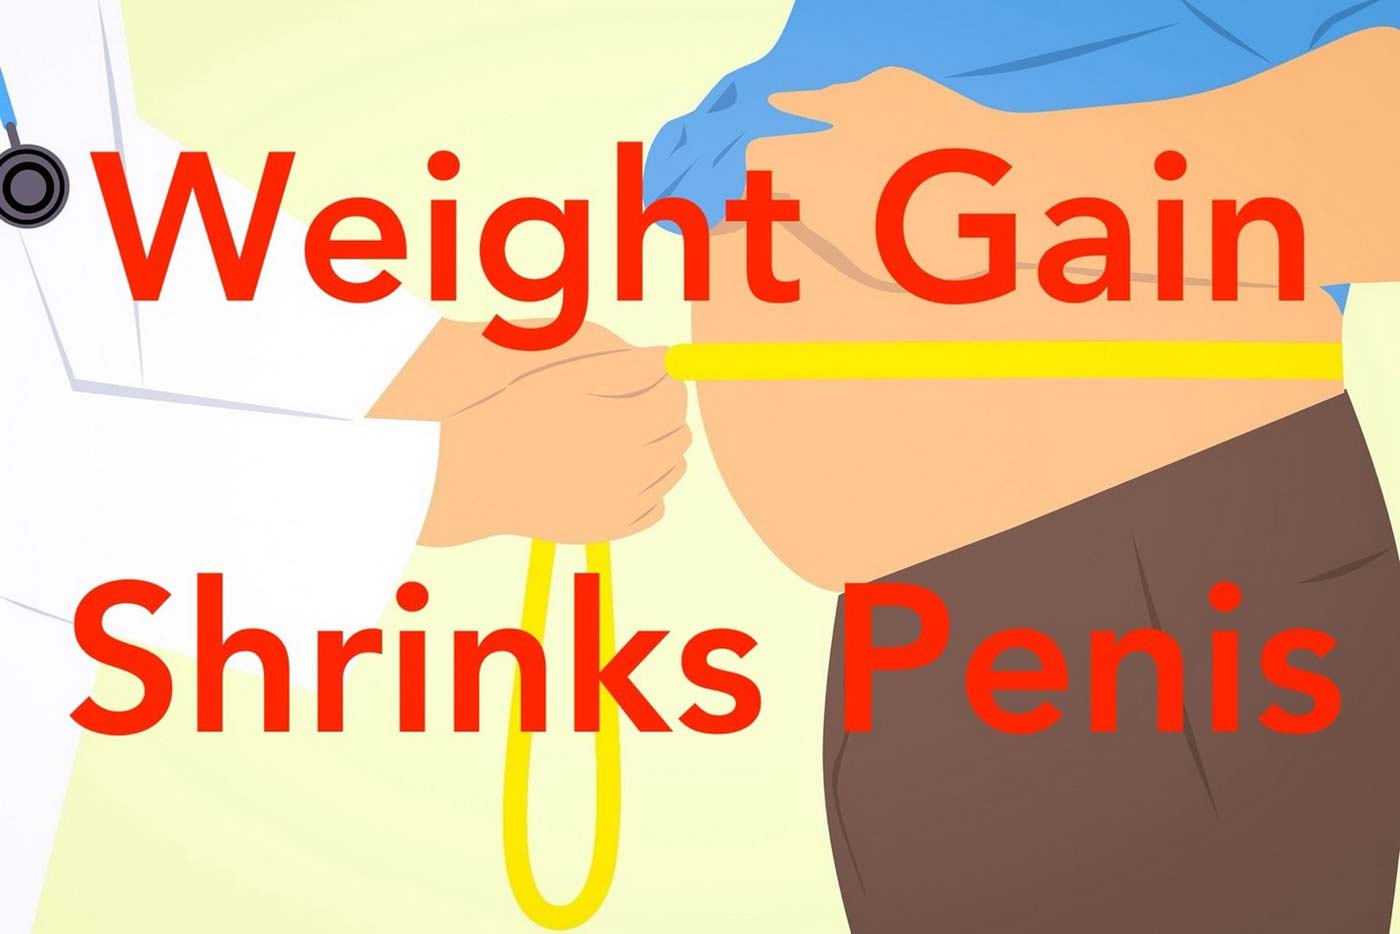 Penile shrinkage after weight gain loss